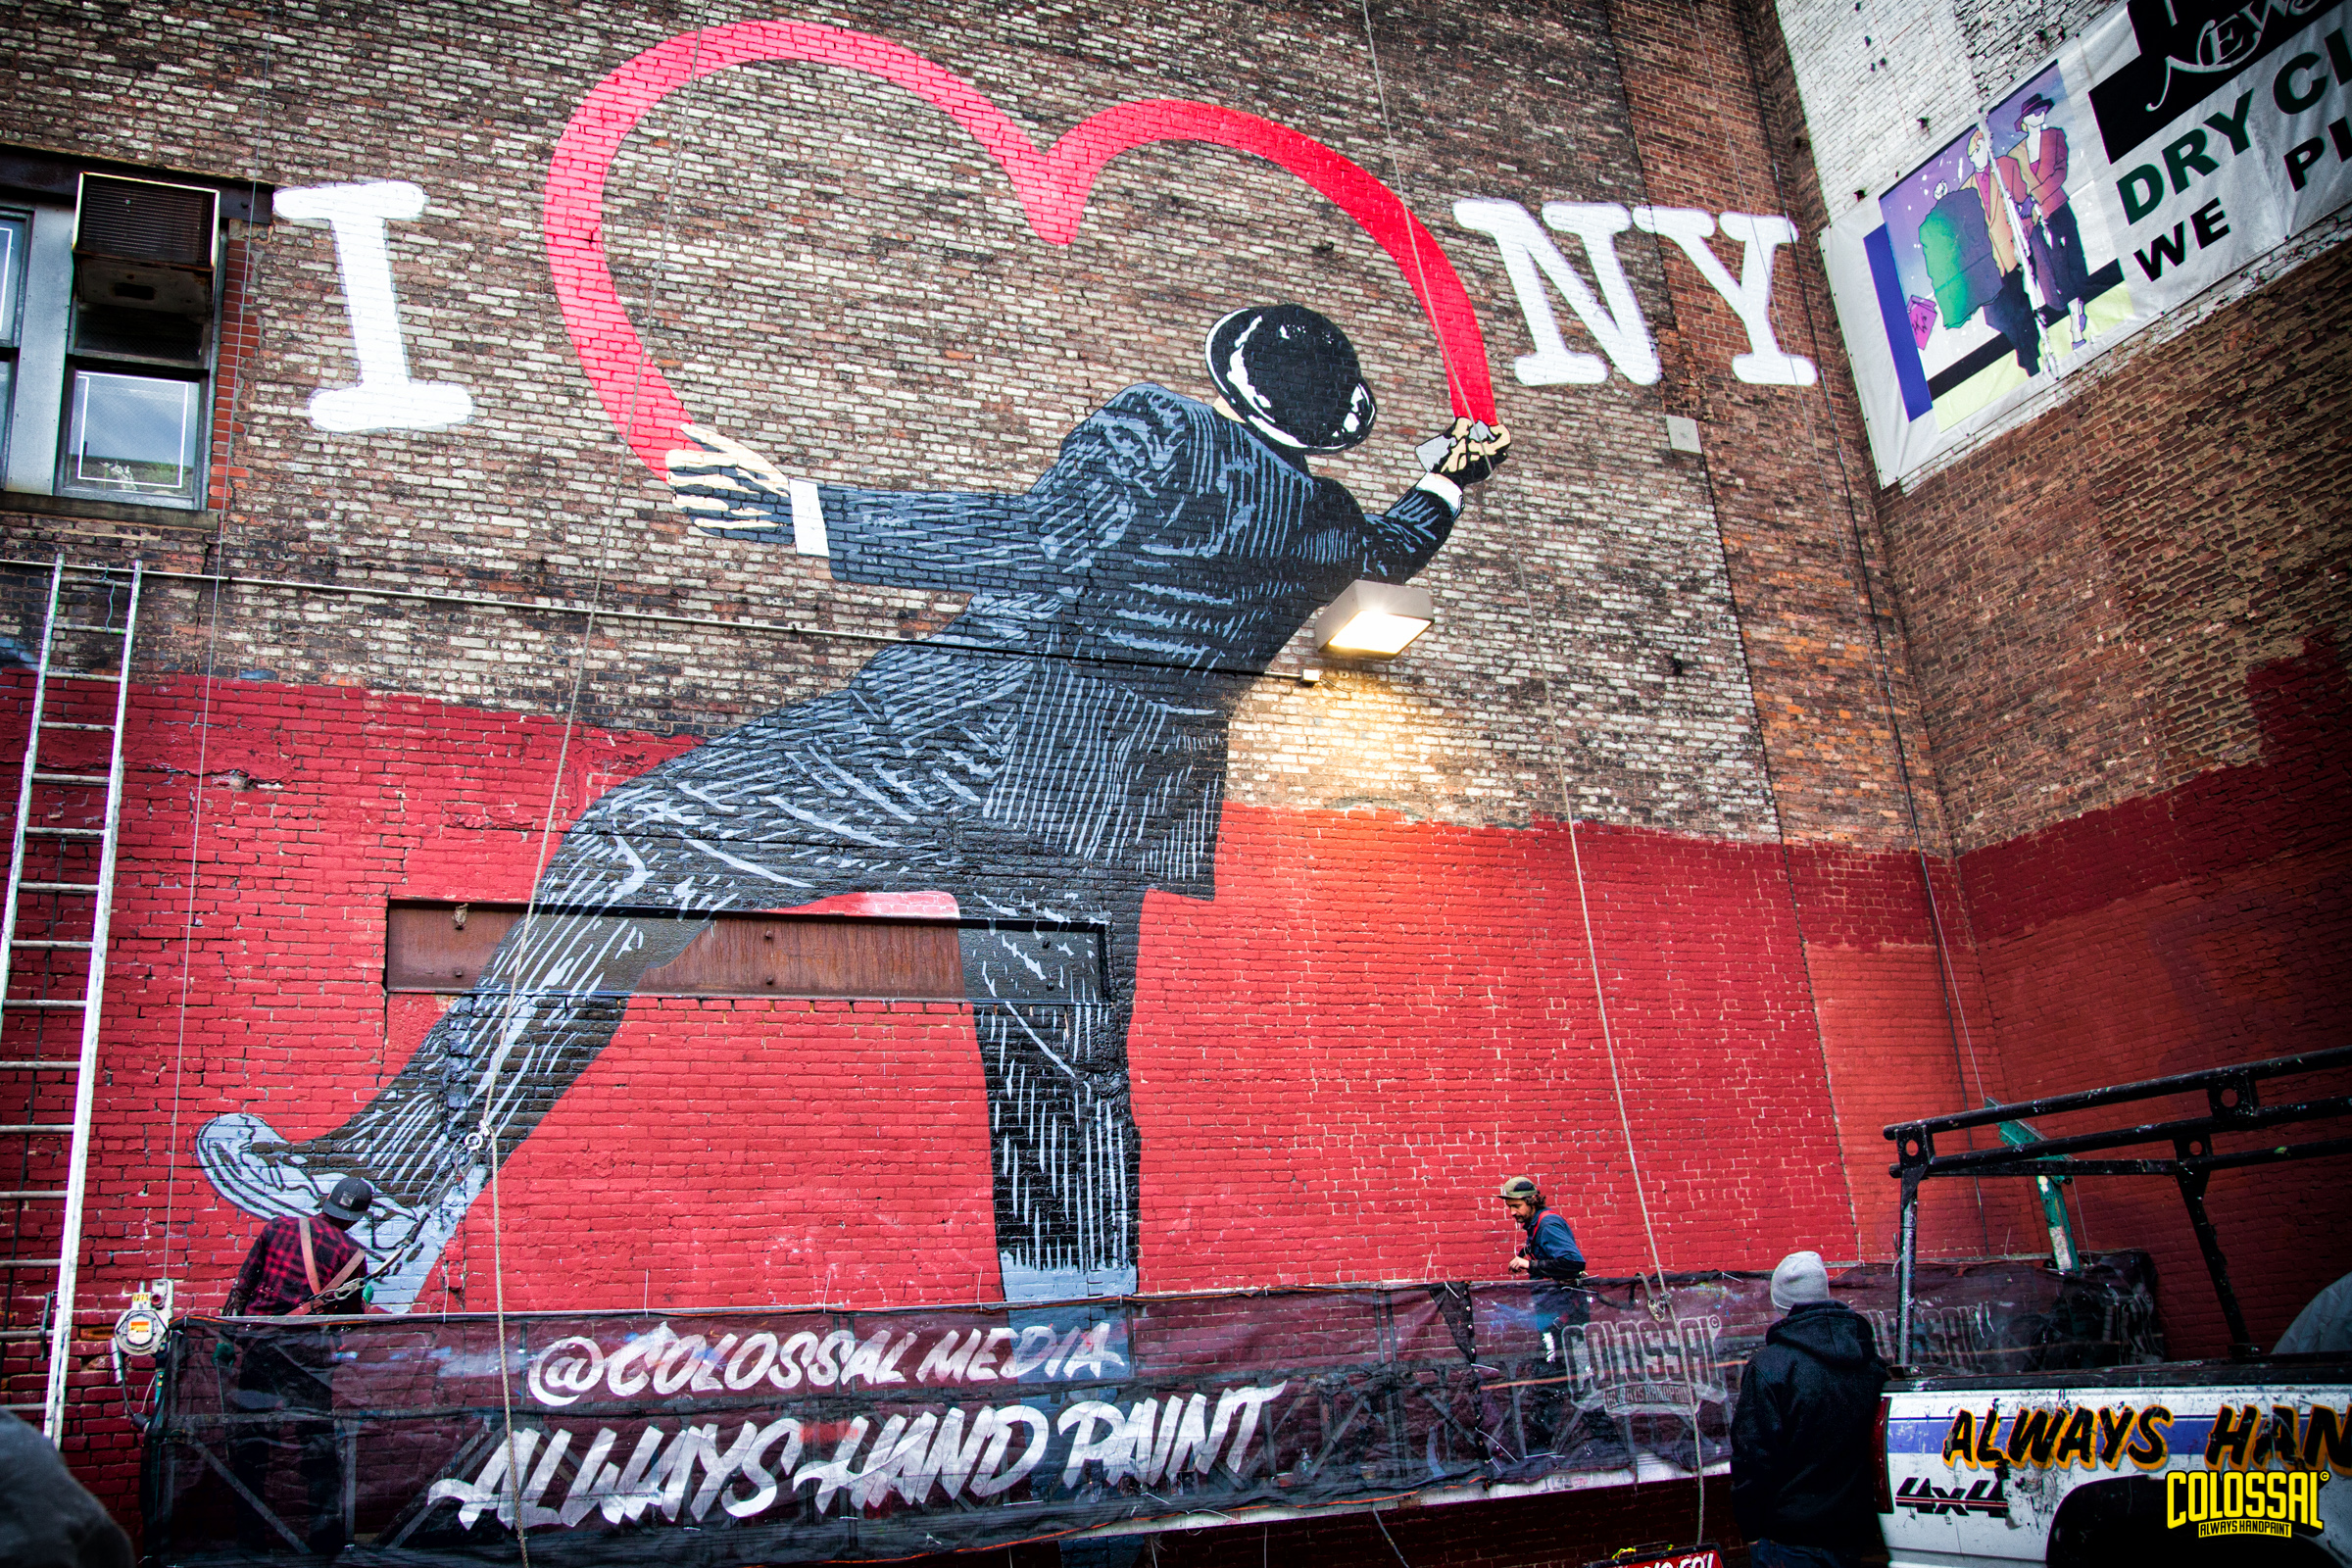 Colossal Media mural with art by Nick Walker. This mural was featured in the TV show Mr.Robot.